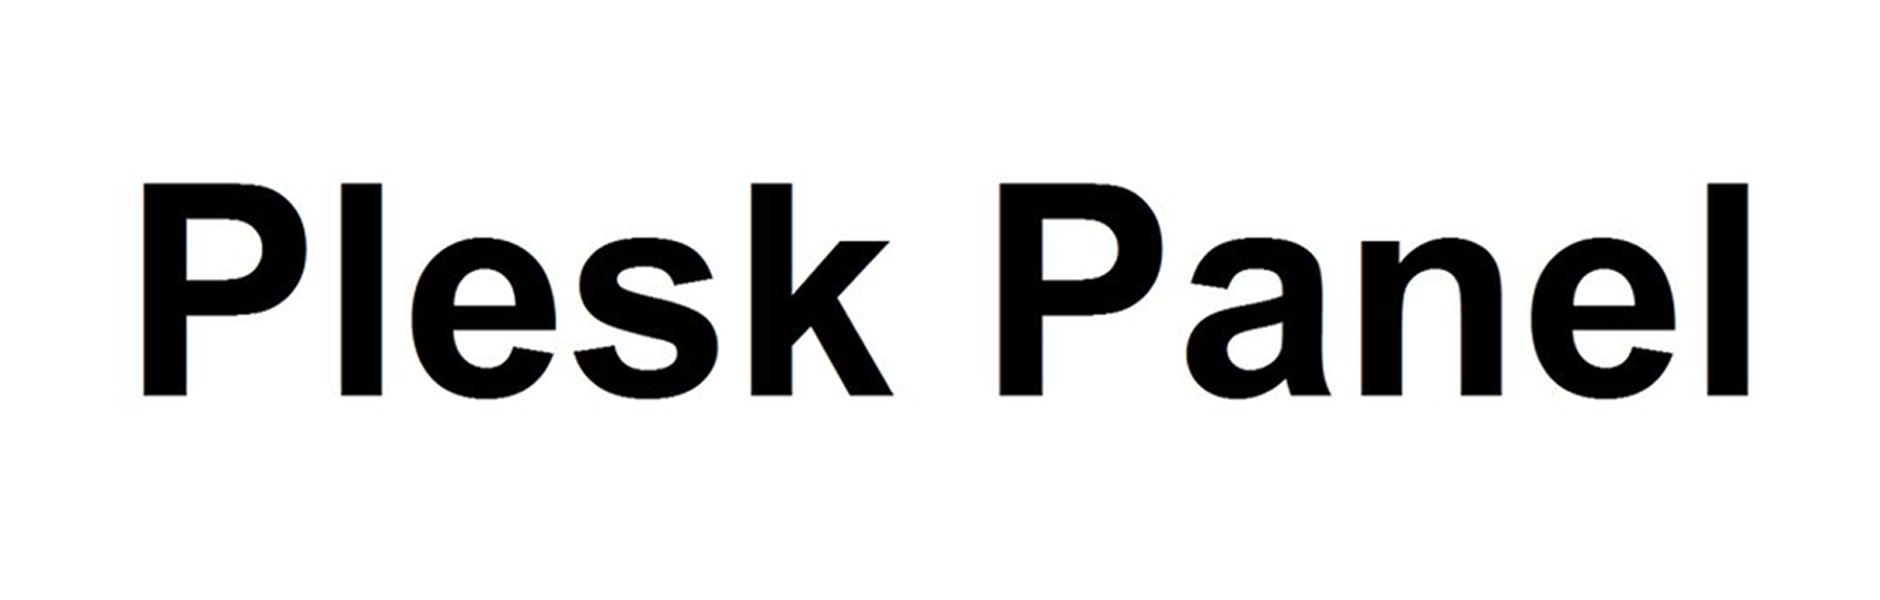 What is Plesk Panel?